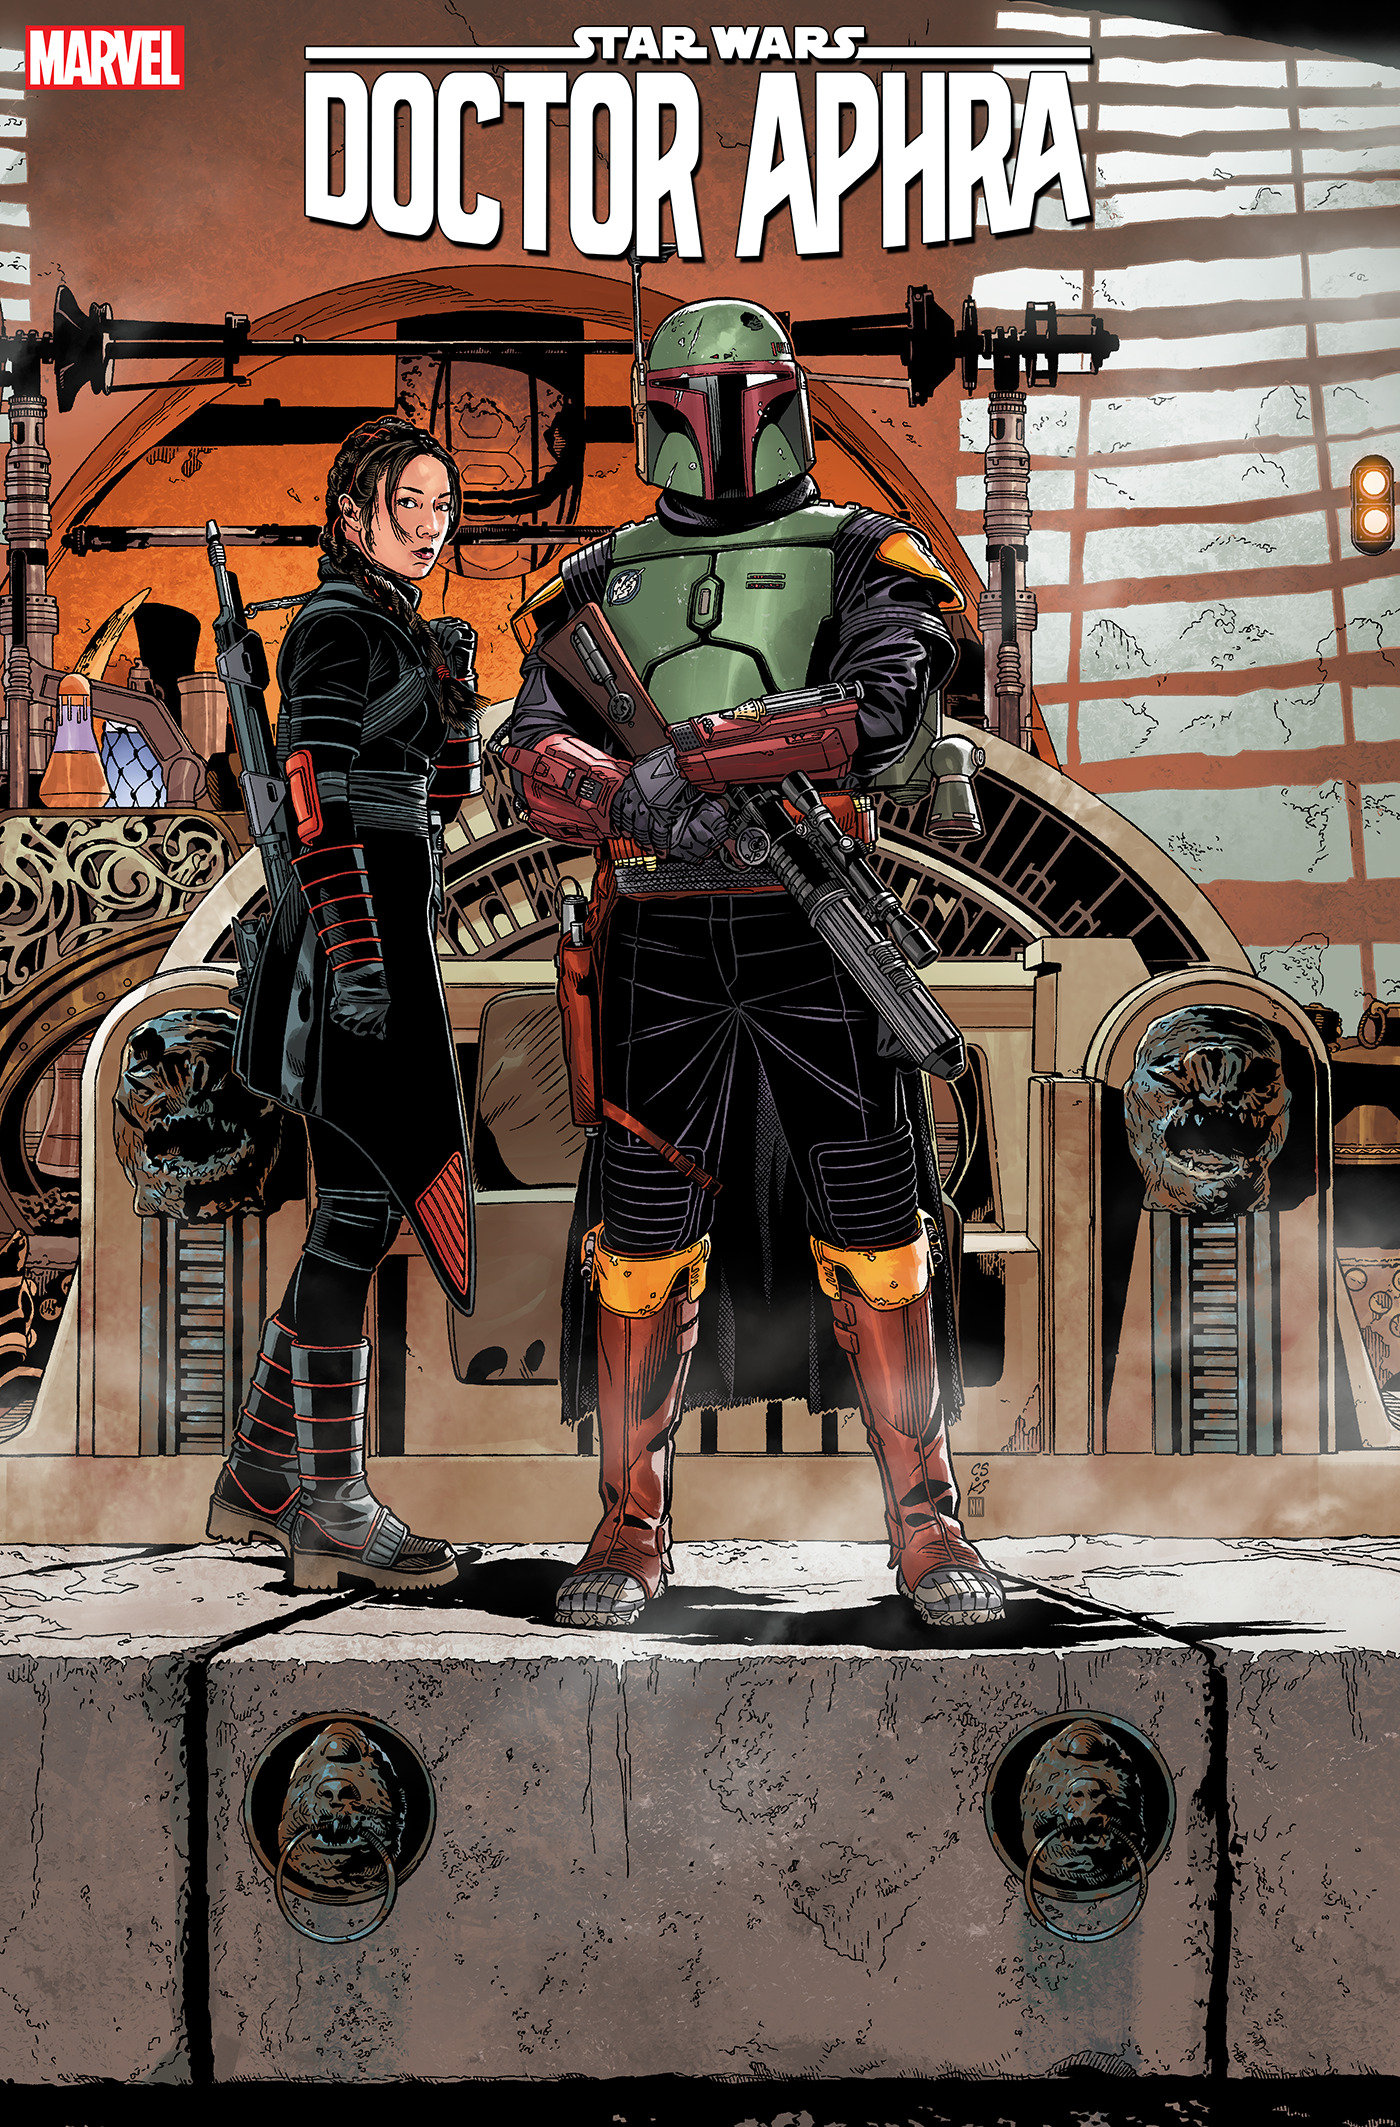 Doctor Aphra #21 (Chris Sprouse "The Book of Boba Fett" Lucasfilm 50th Anniversary Variant Cover) (29.06.2022)